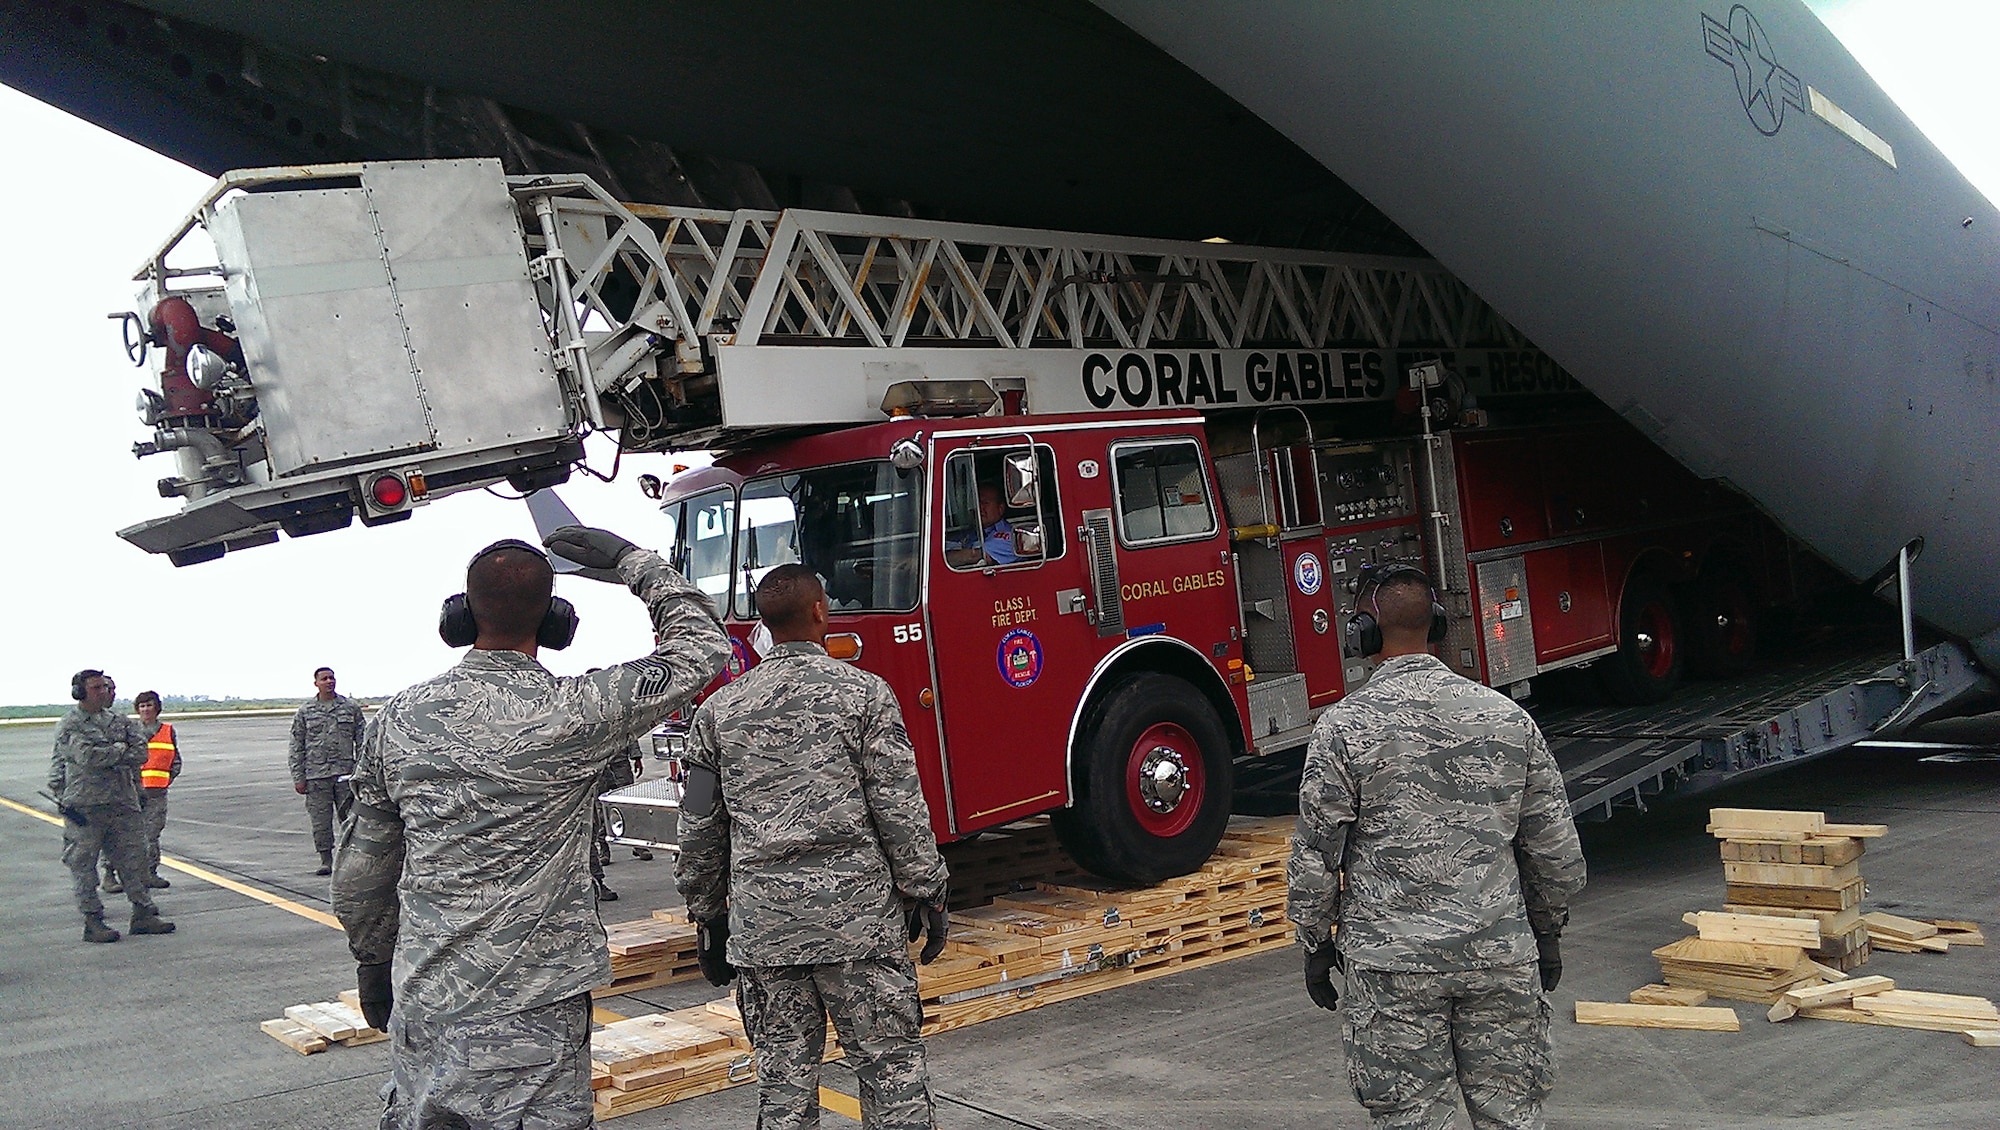 A a City of Coral Gables firetruck is loaded into the back of a Joint Base Charleston C-17 Globemaster III at Homestead Air Reserve Base, Fl. April 2.  Reservists from 300th Airlift Squadron delivered the donated fire truck to to La Antigua, Guatemala as part of the Denton Cargo program. (Courtesy Photo)